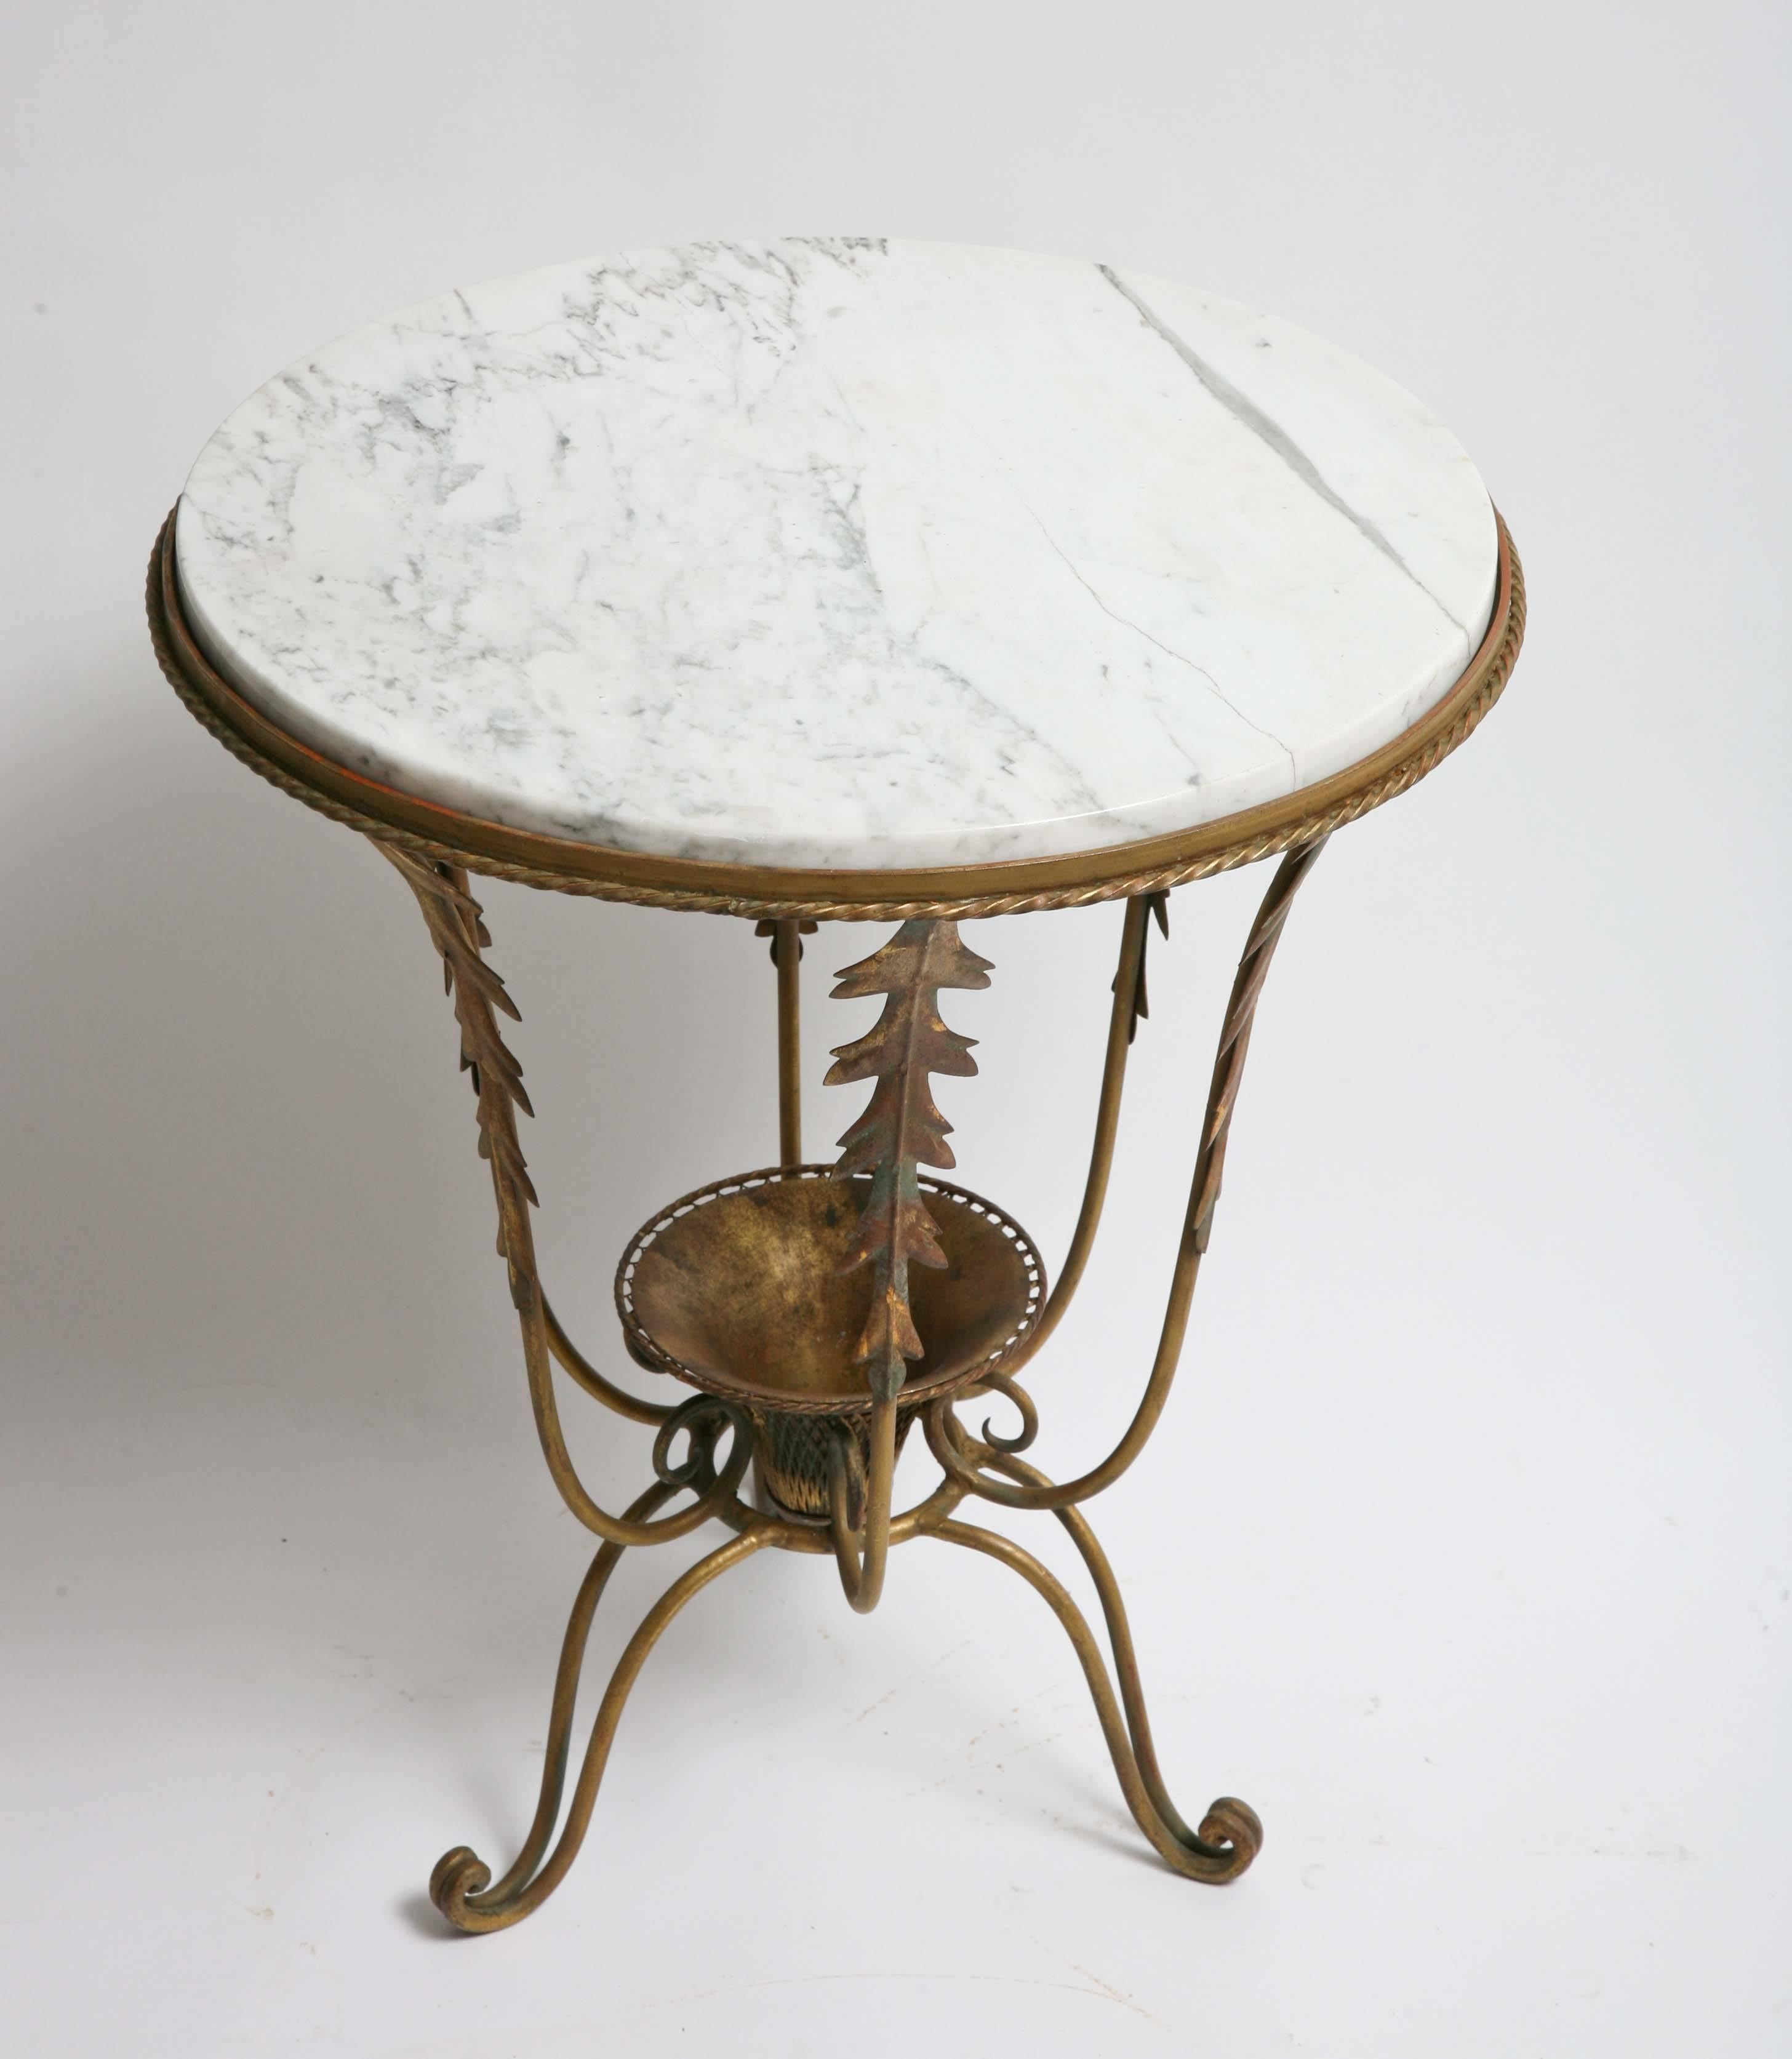 Gilded iron construction with marble top. Sold in as found condition.